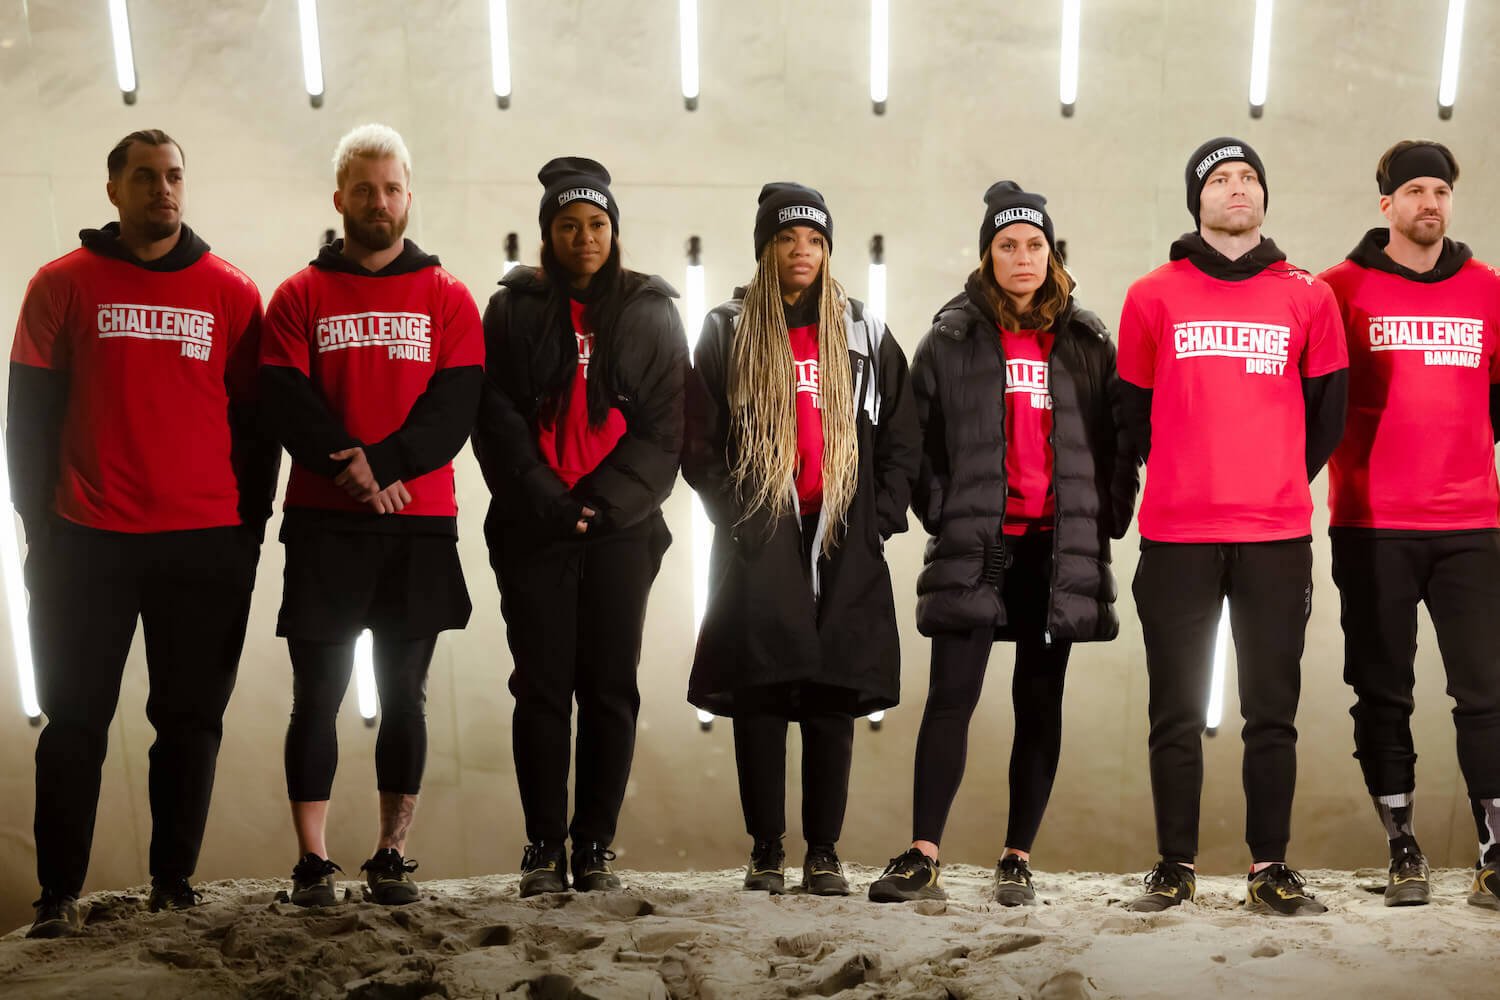 'The Challenge: USA' Season 2 red team standing in a line while wearing red